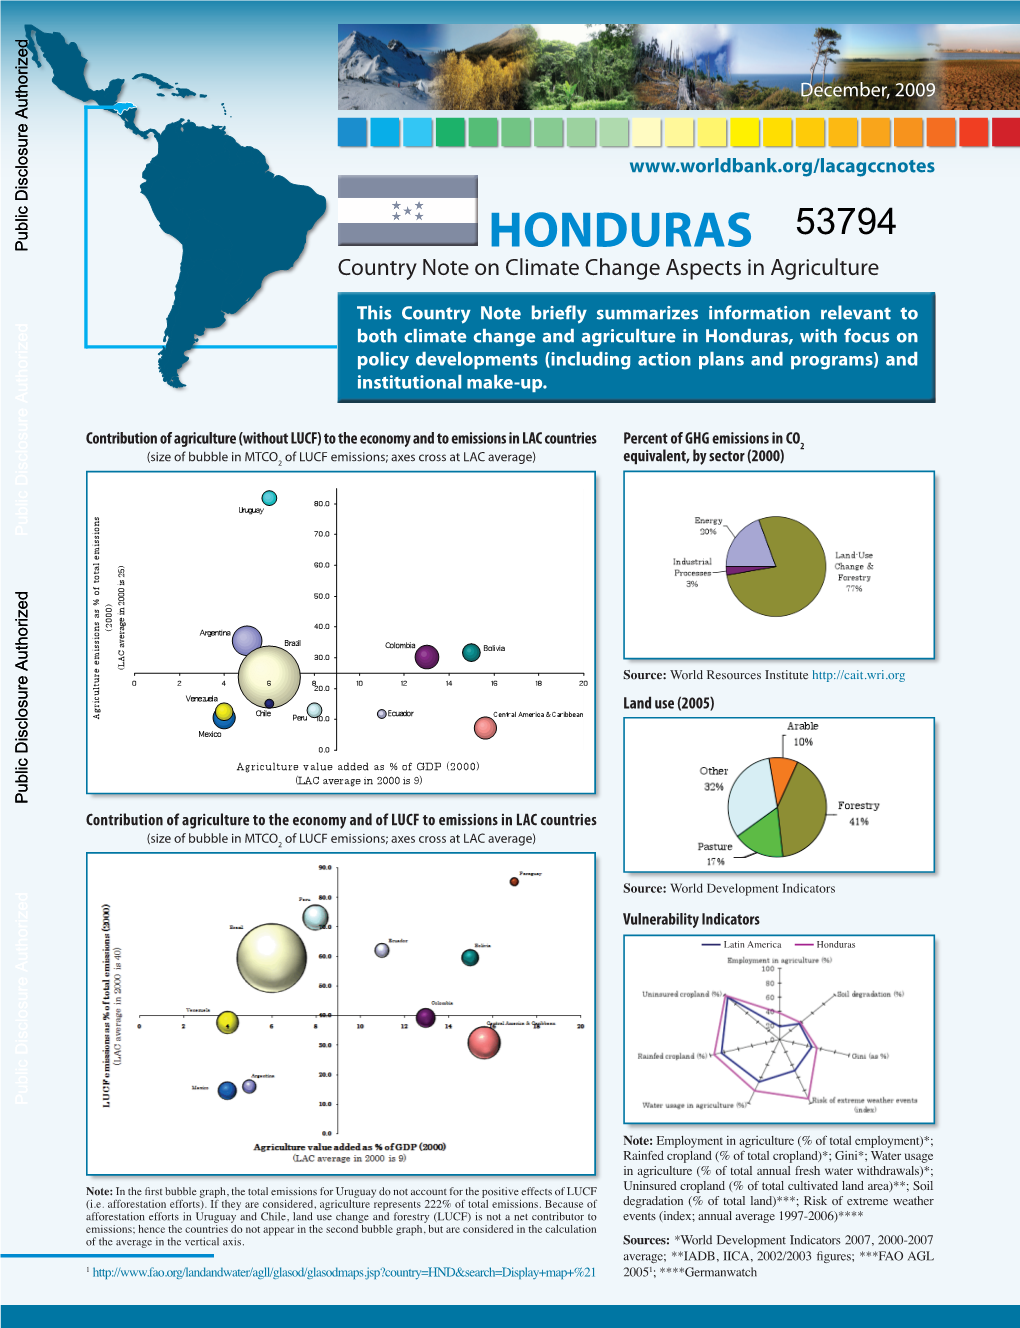 HONDURAS Country Note on Climate Change Aspects in Agriculture